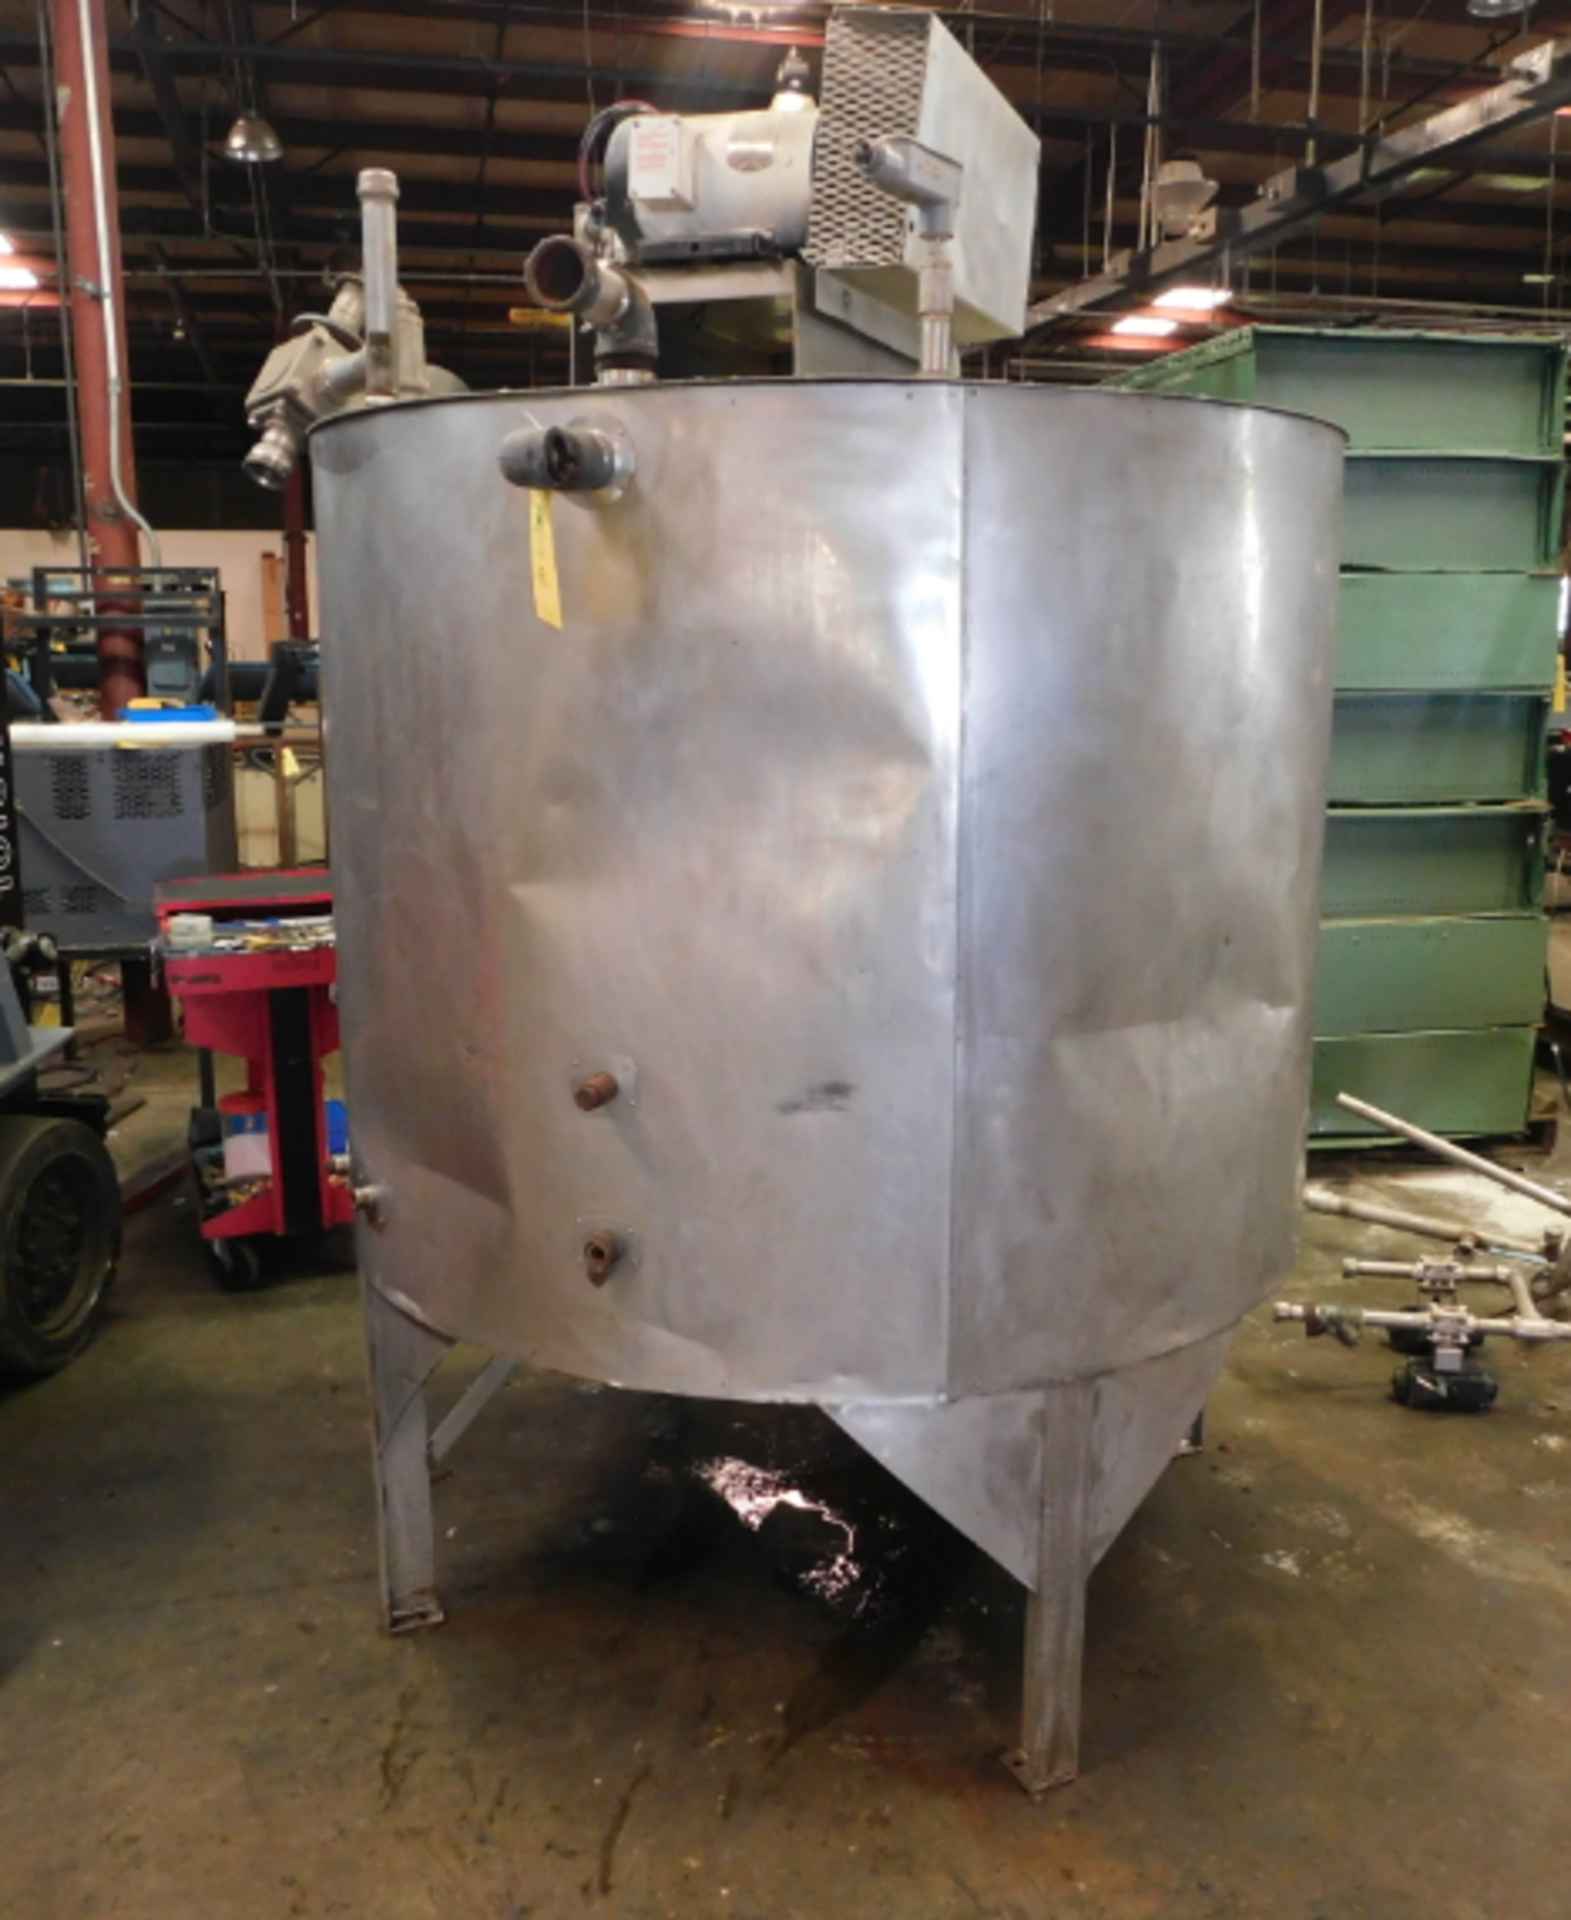 Stainless Steel Tank, 62 inches Diameter, 48.25 inches Height, Agitator/Mixer, Discharge Side and